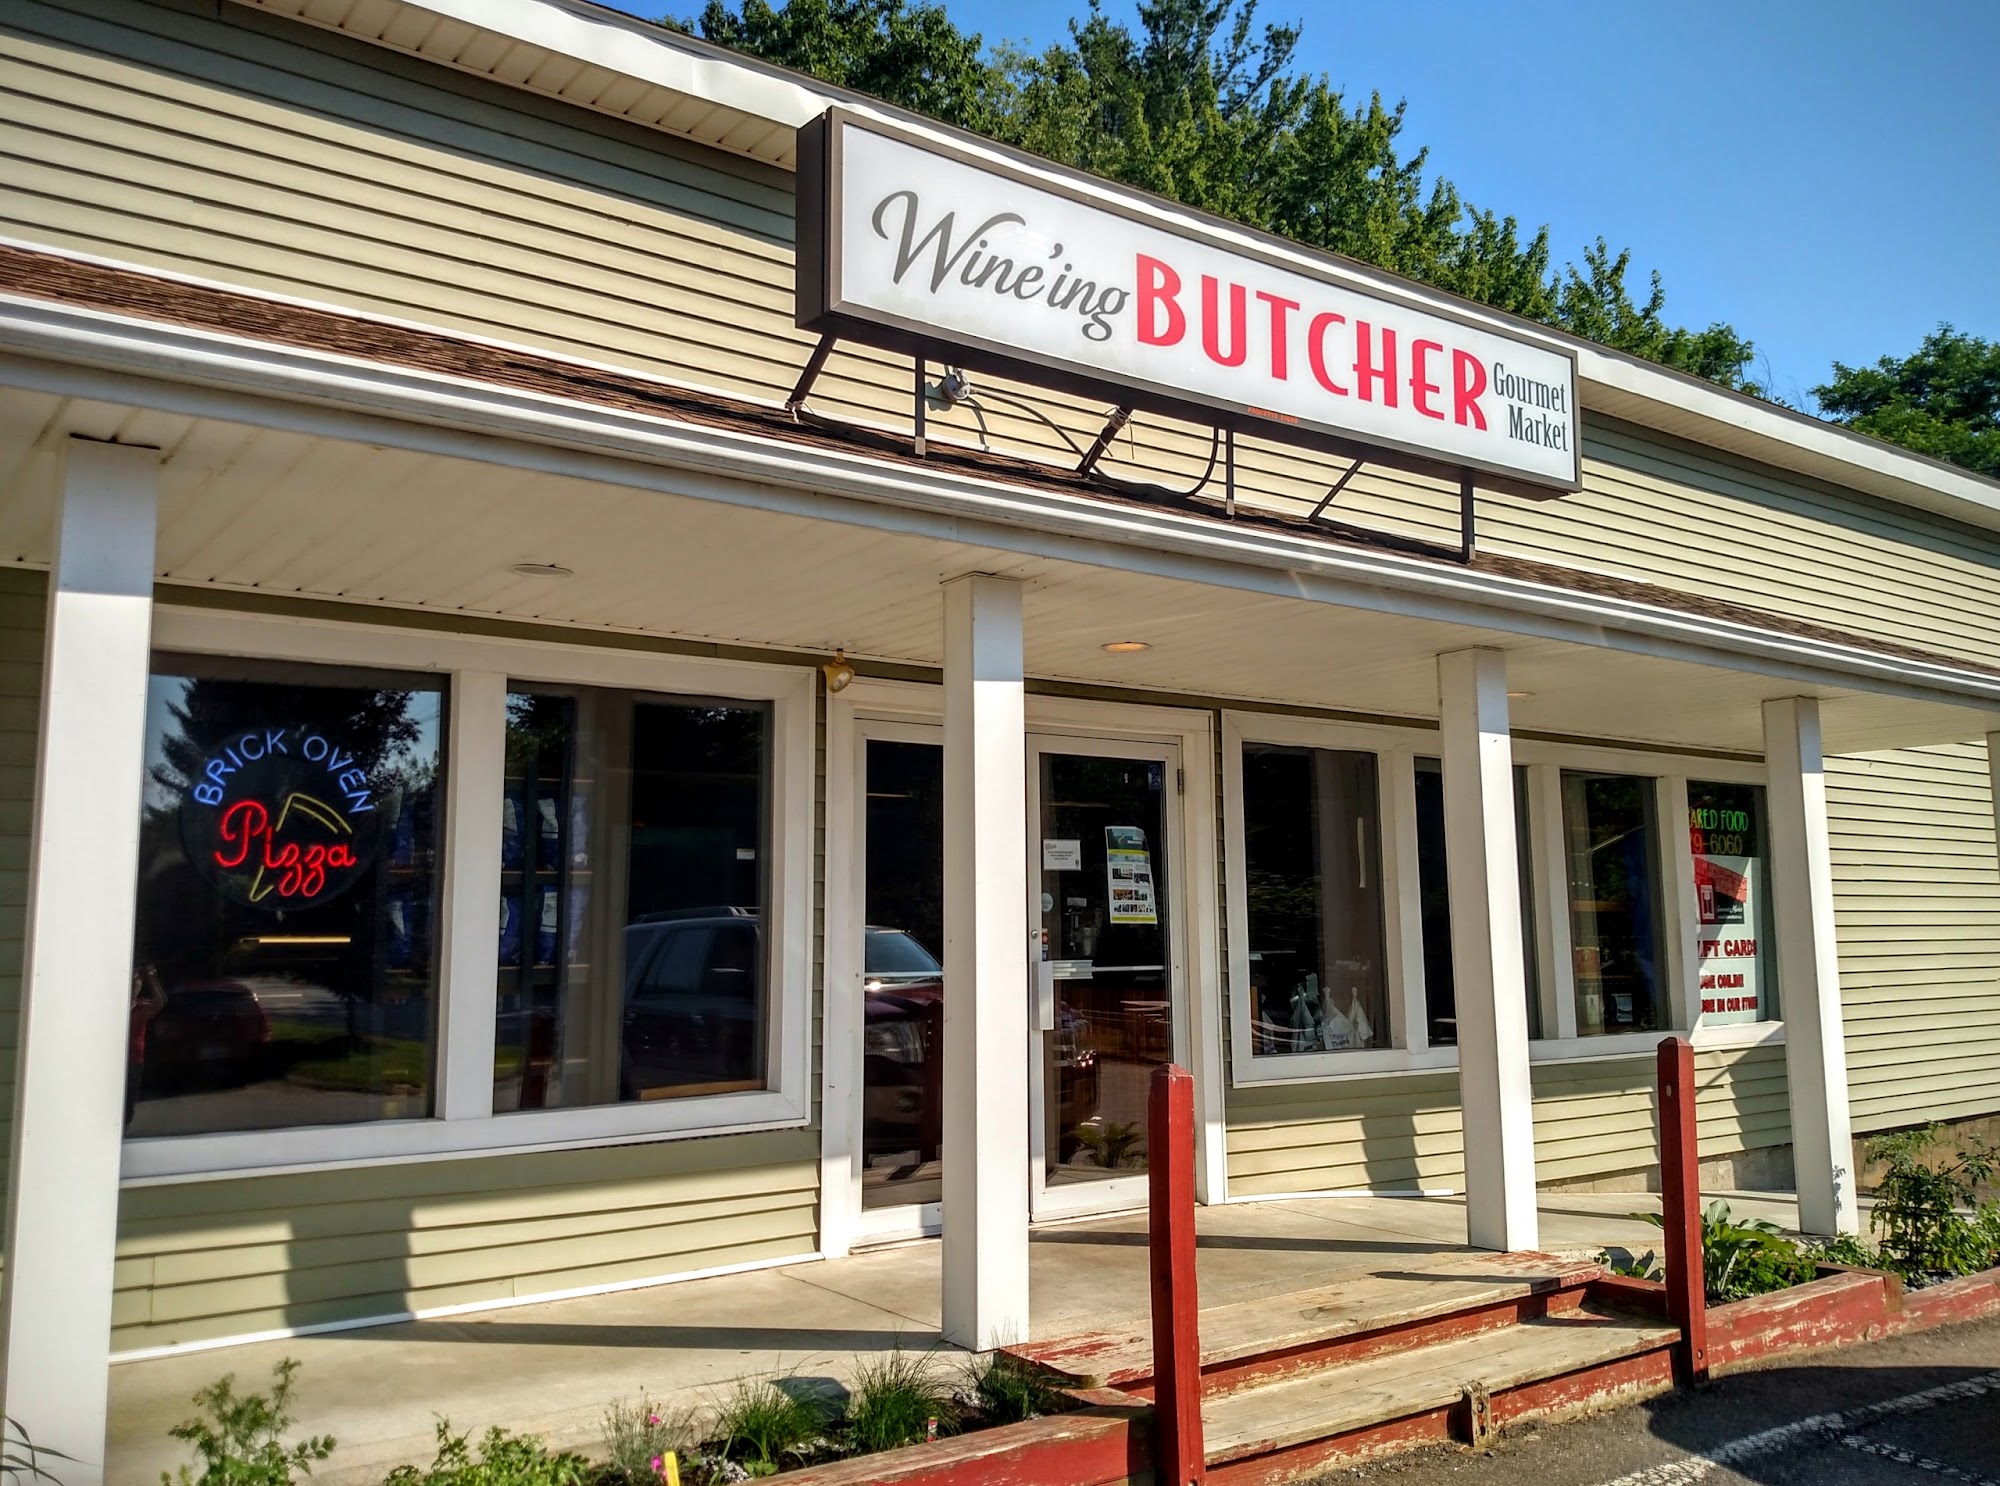 The Wine'ing Butcher